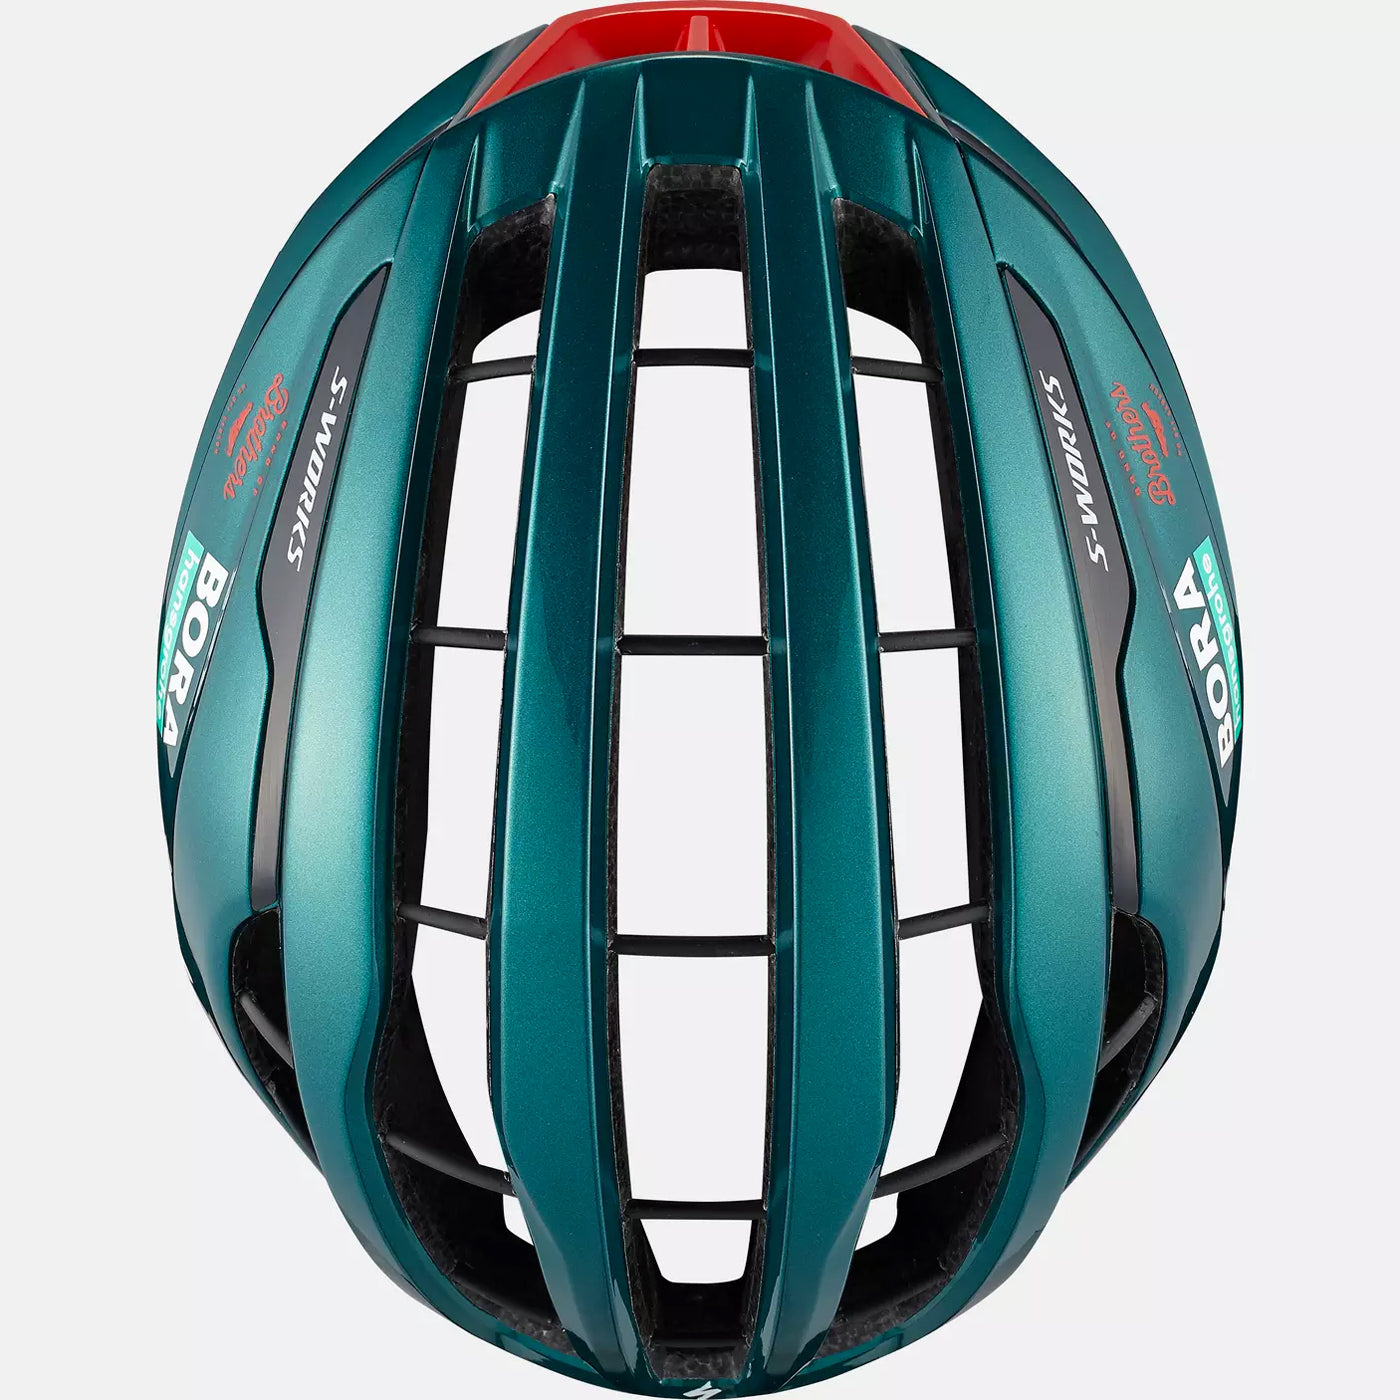 Specialized Prevail 3 helm - Bora Hansgrohe